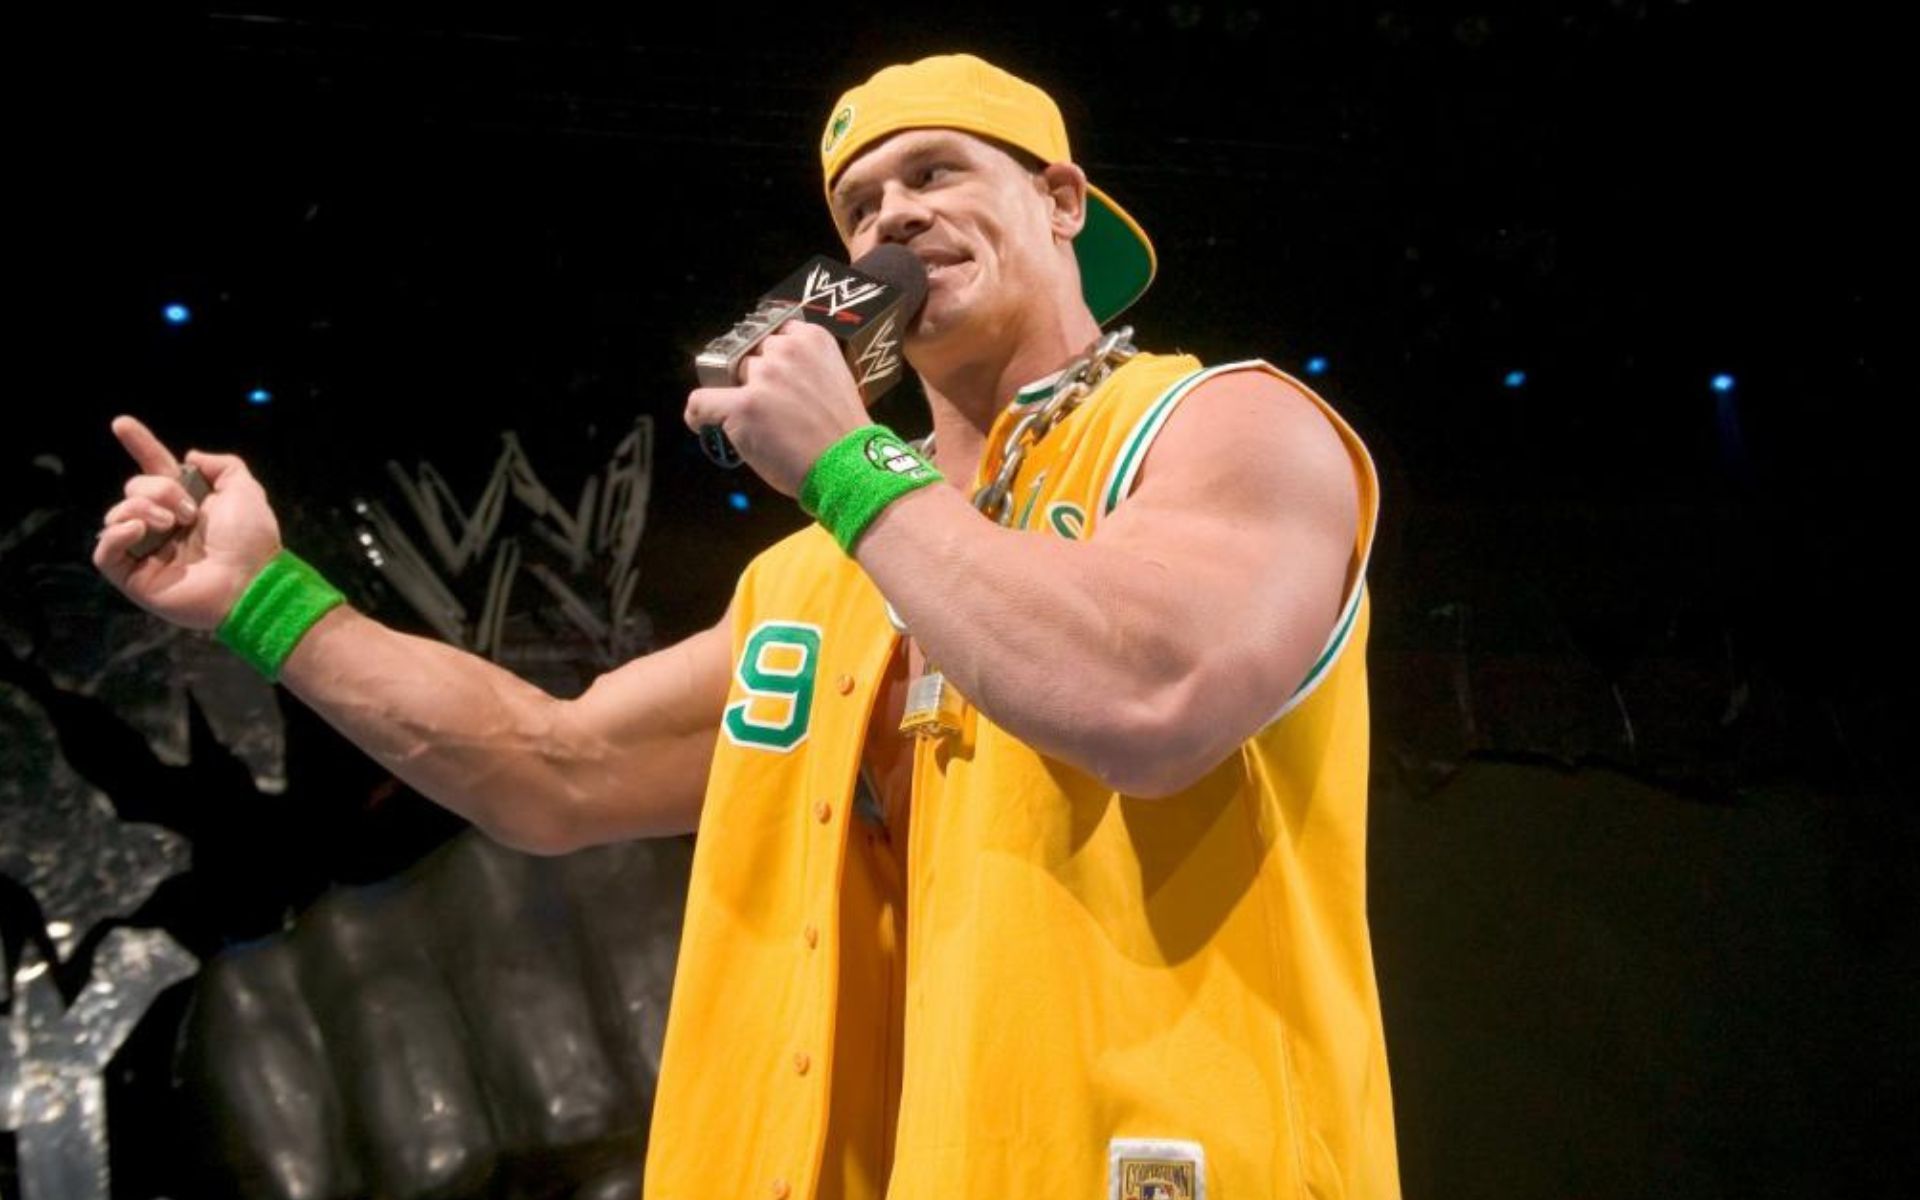 John Cena often wore a chain with a padlock early on in his career